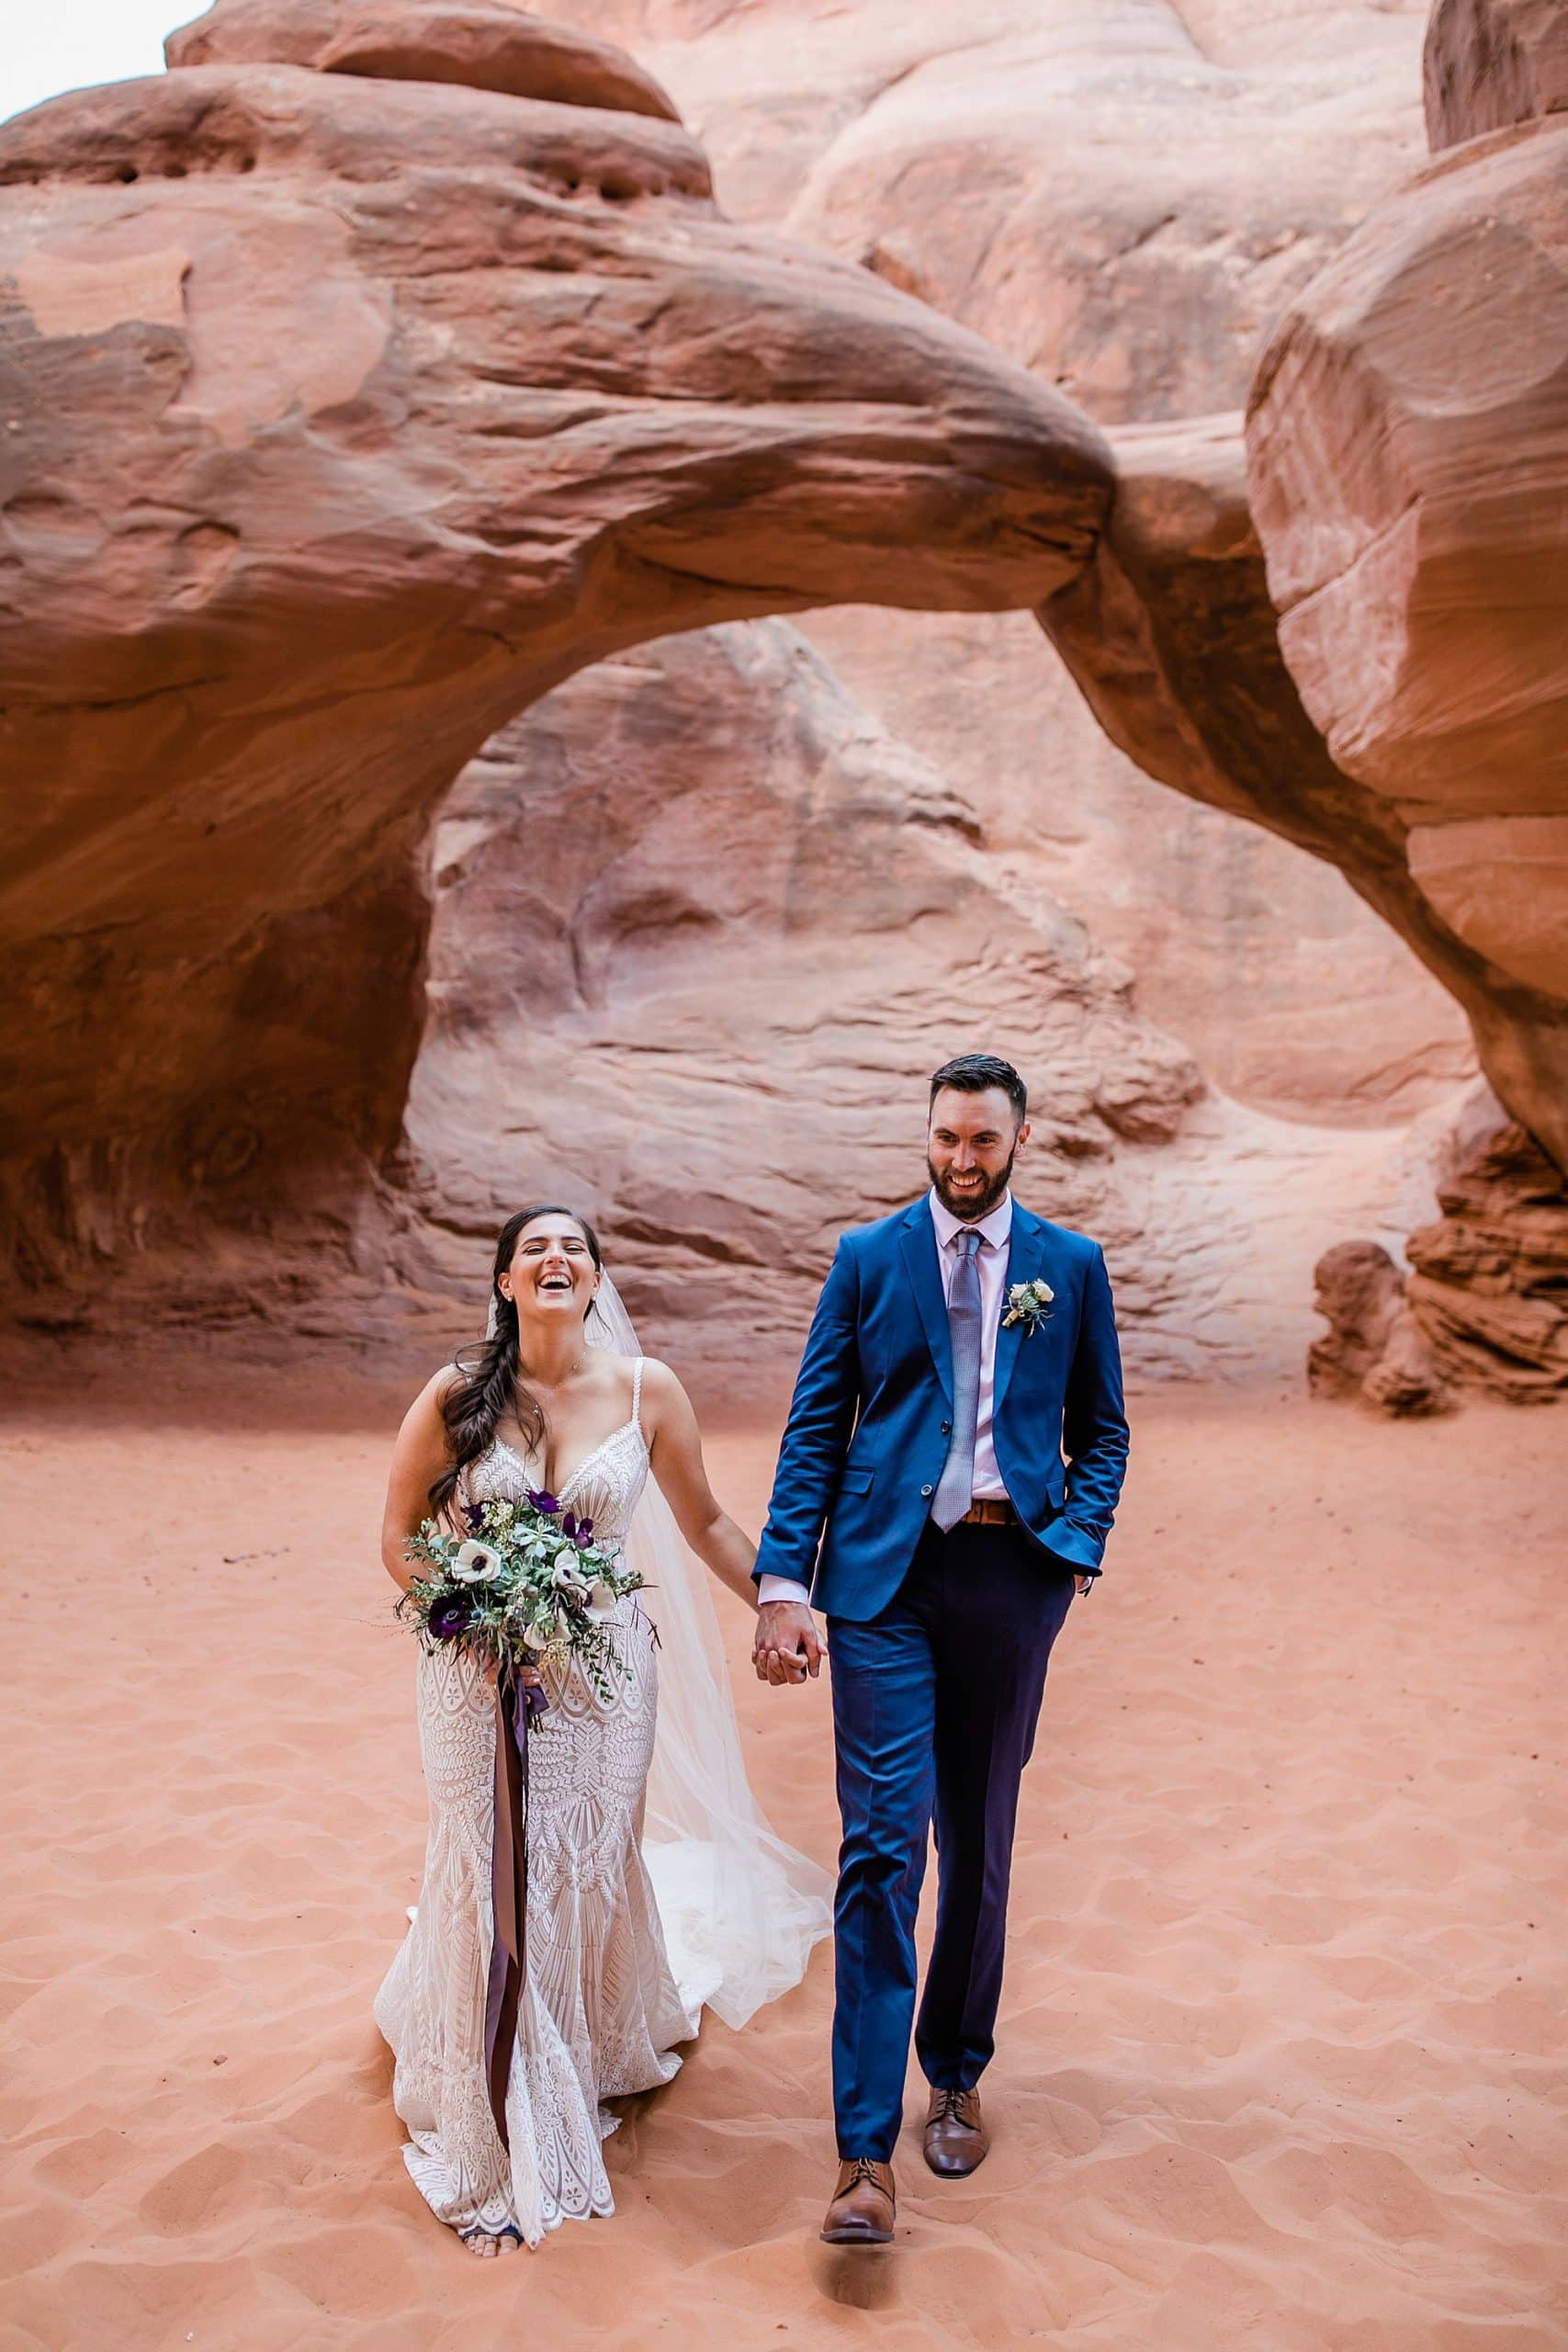 A bride laughs while holding her groom's hand near Sand Dune Arch in Moab, Utah.